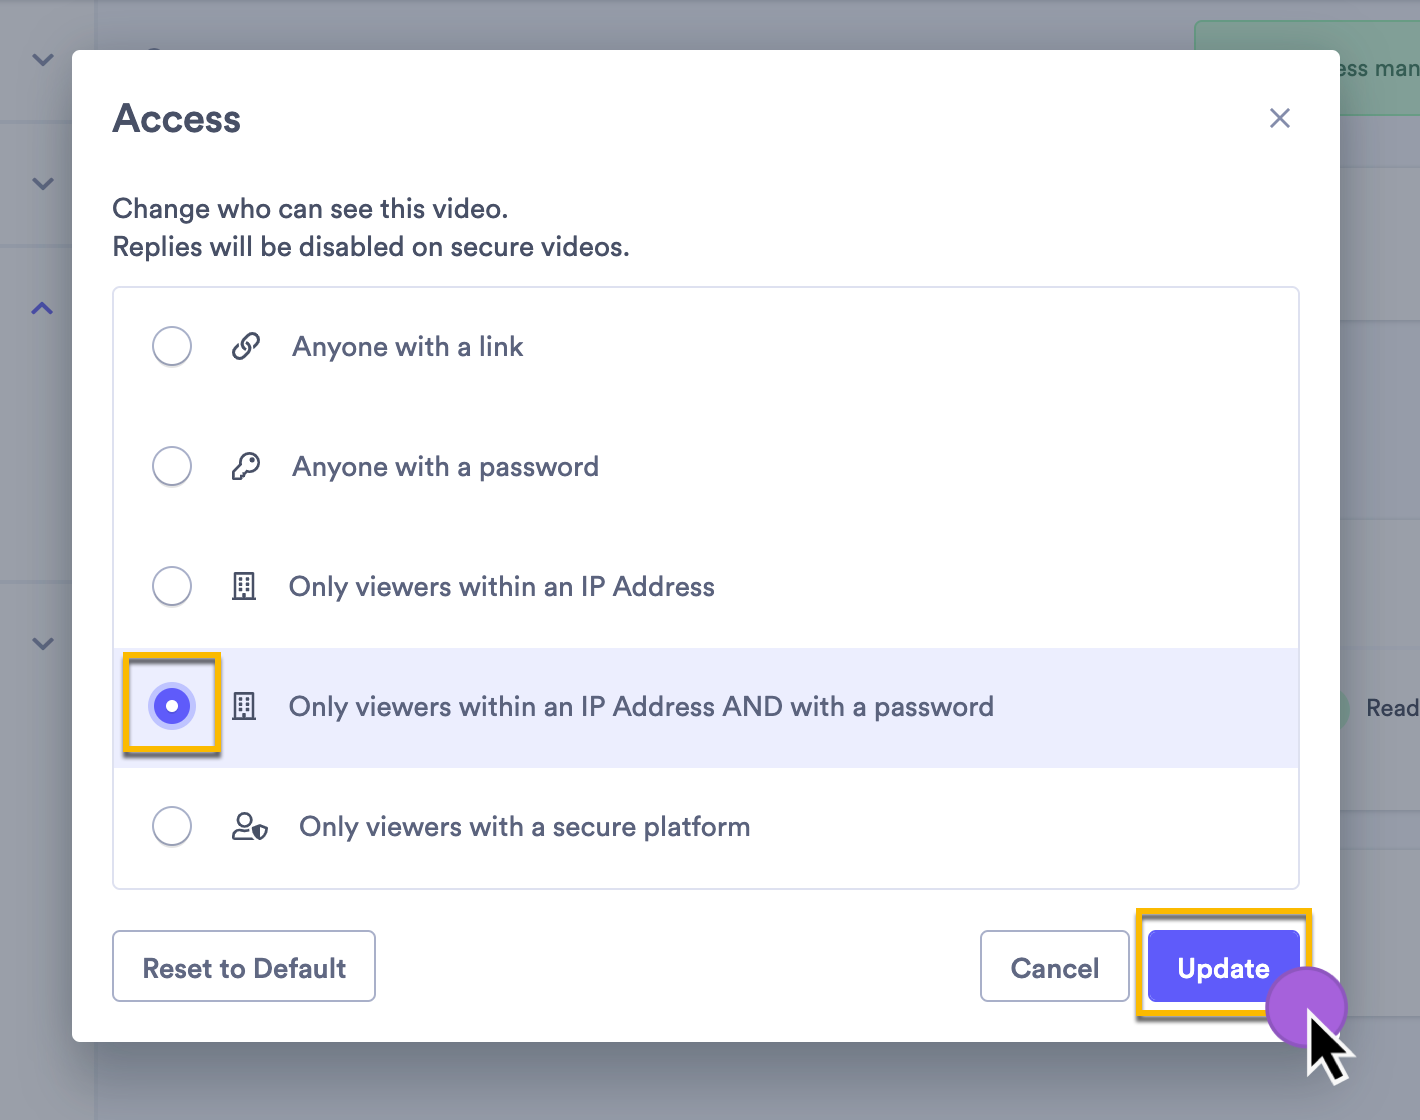 Selecting the access setting on a video that requires viewers to also enter a password, in addition to being connected to a permitted IP address